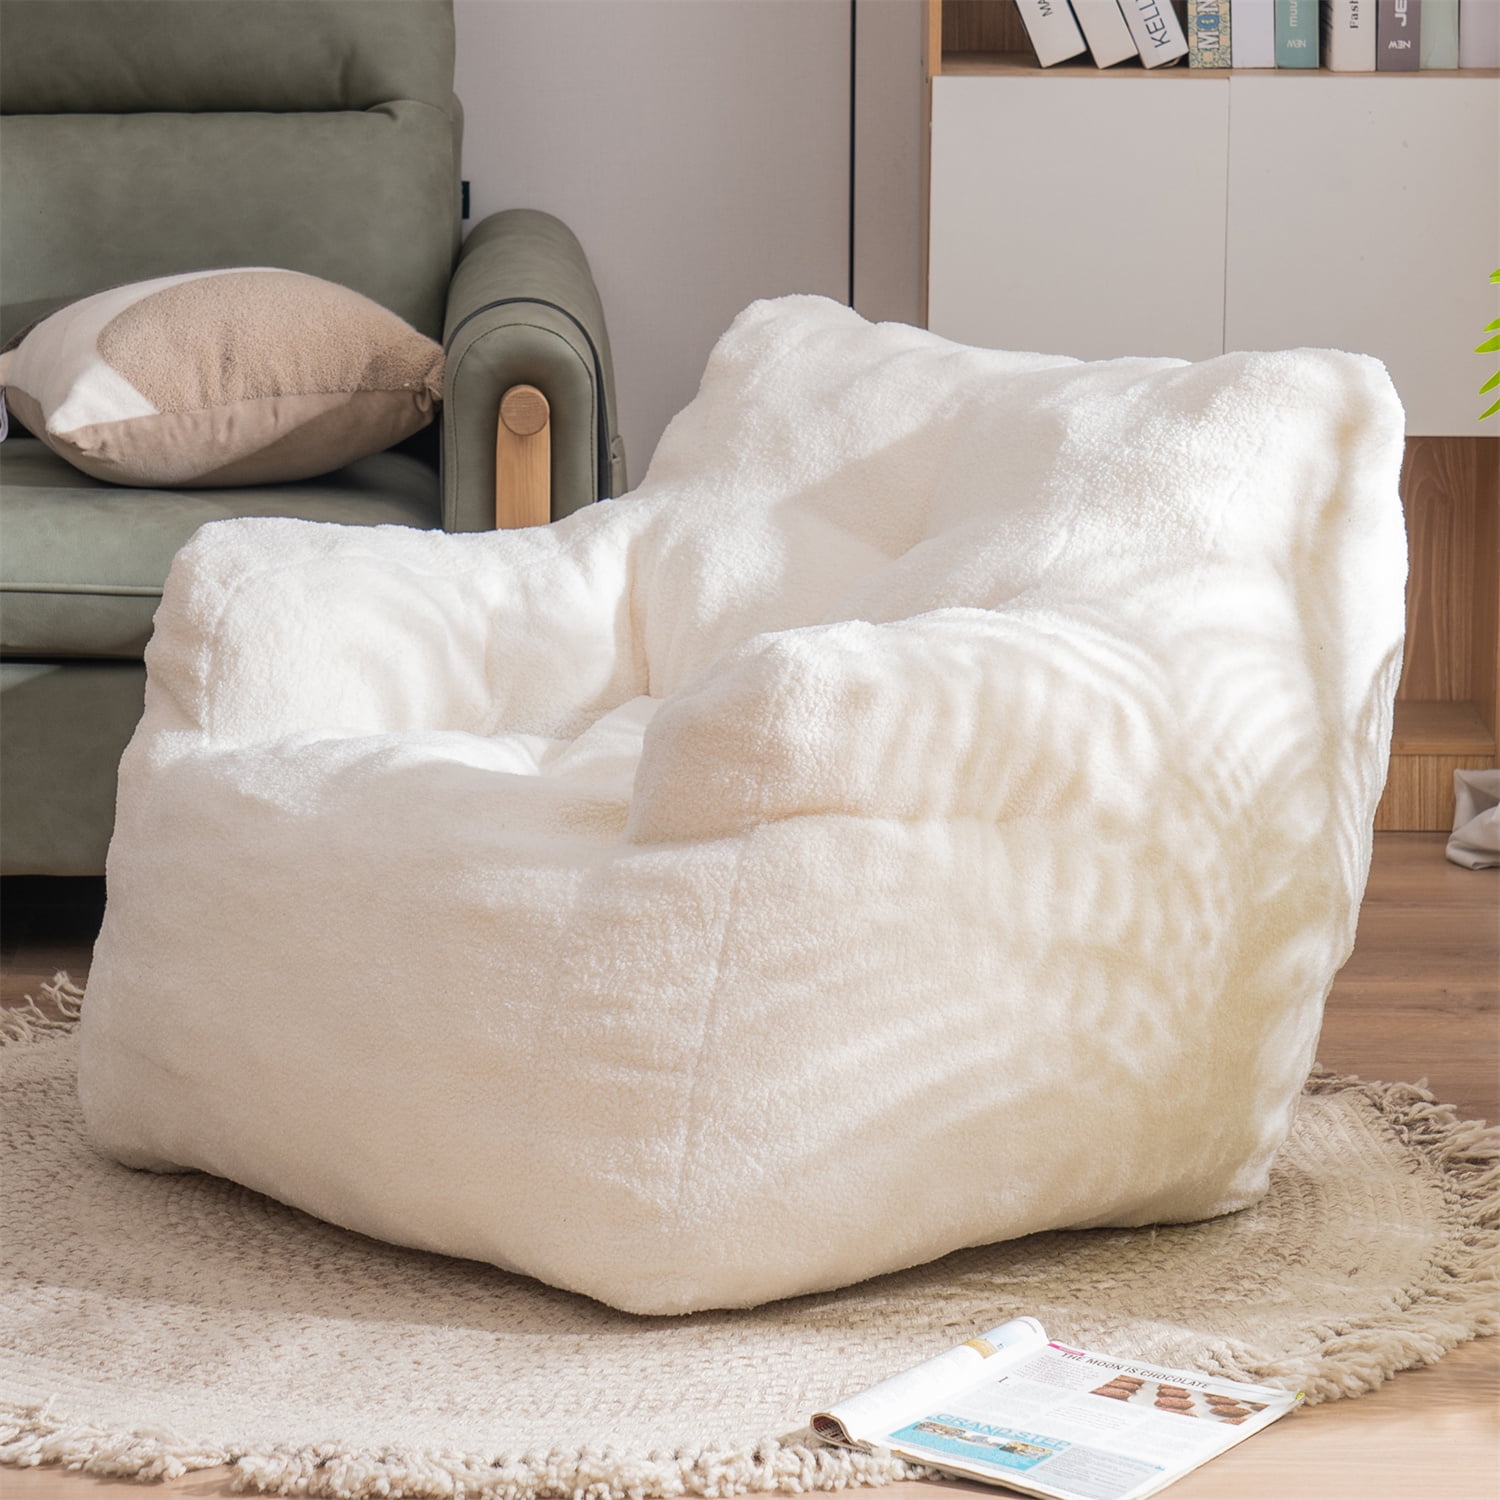 Bean Bag Chairs, Tufted Soft Stuffed Bean Bag Chair with Foam Filling,  Fluffy Lazy Sofa, Faux Fur Bean Bag Chair for Bedroom, Living Room,Ivory 